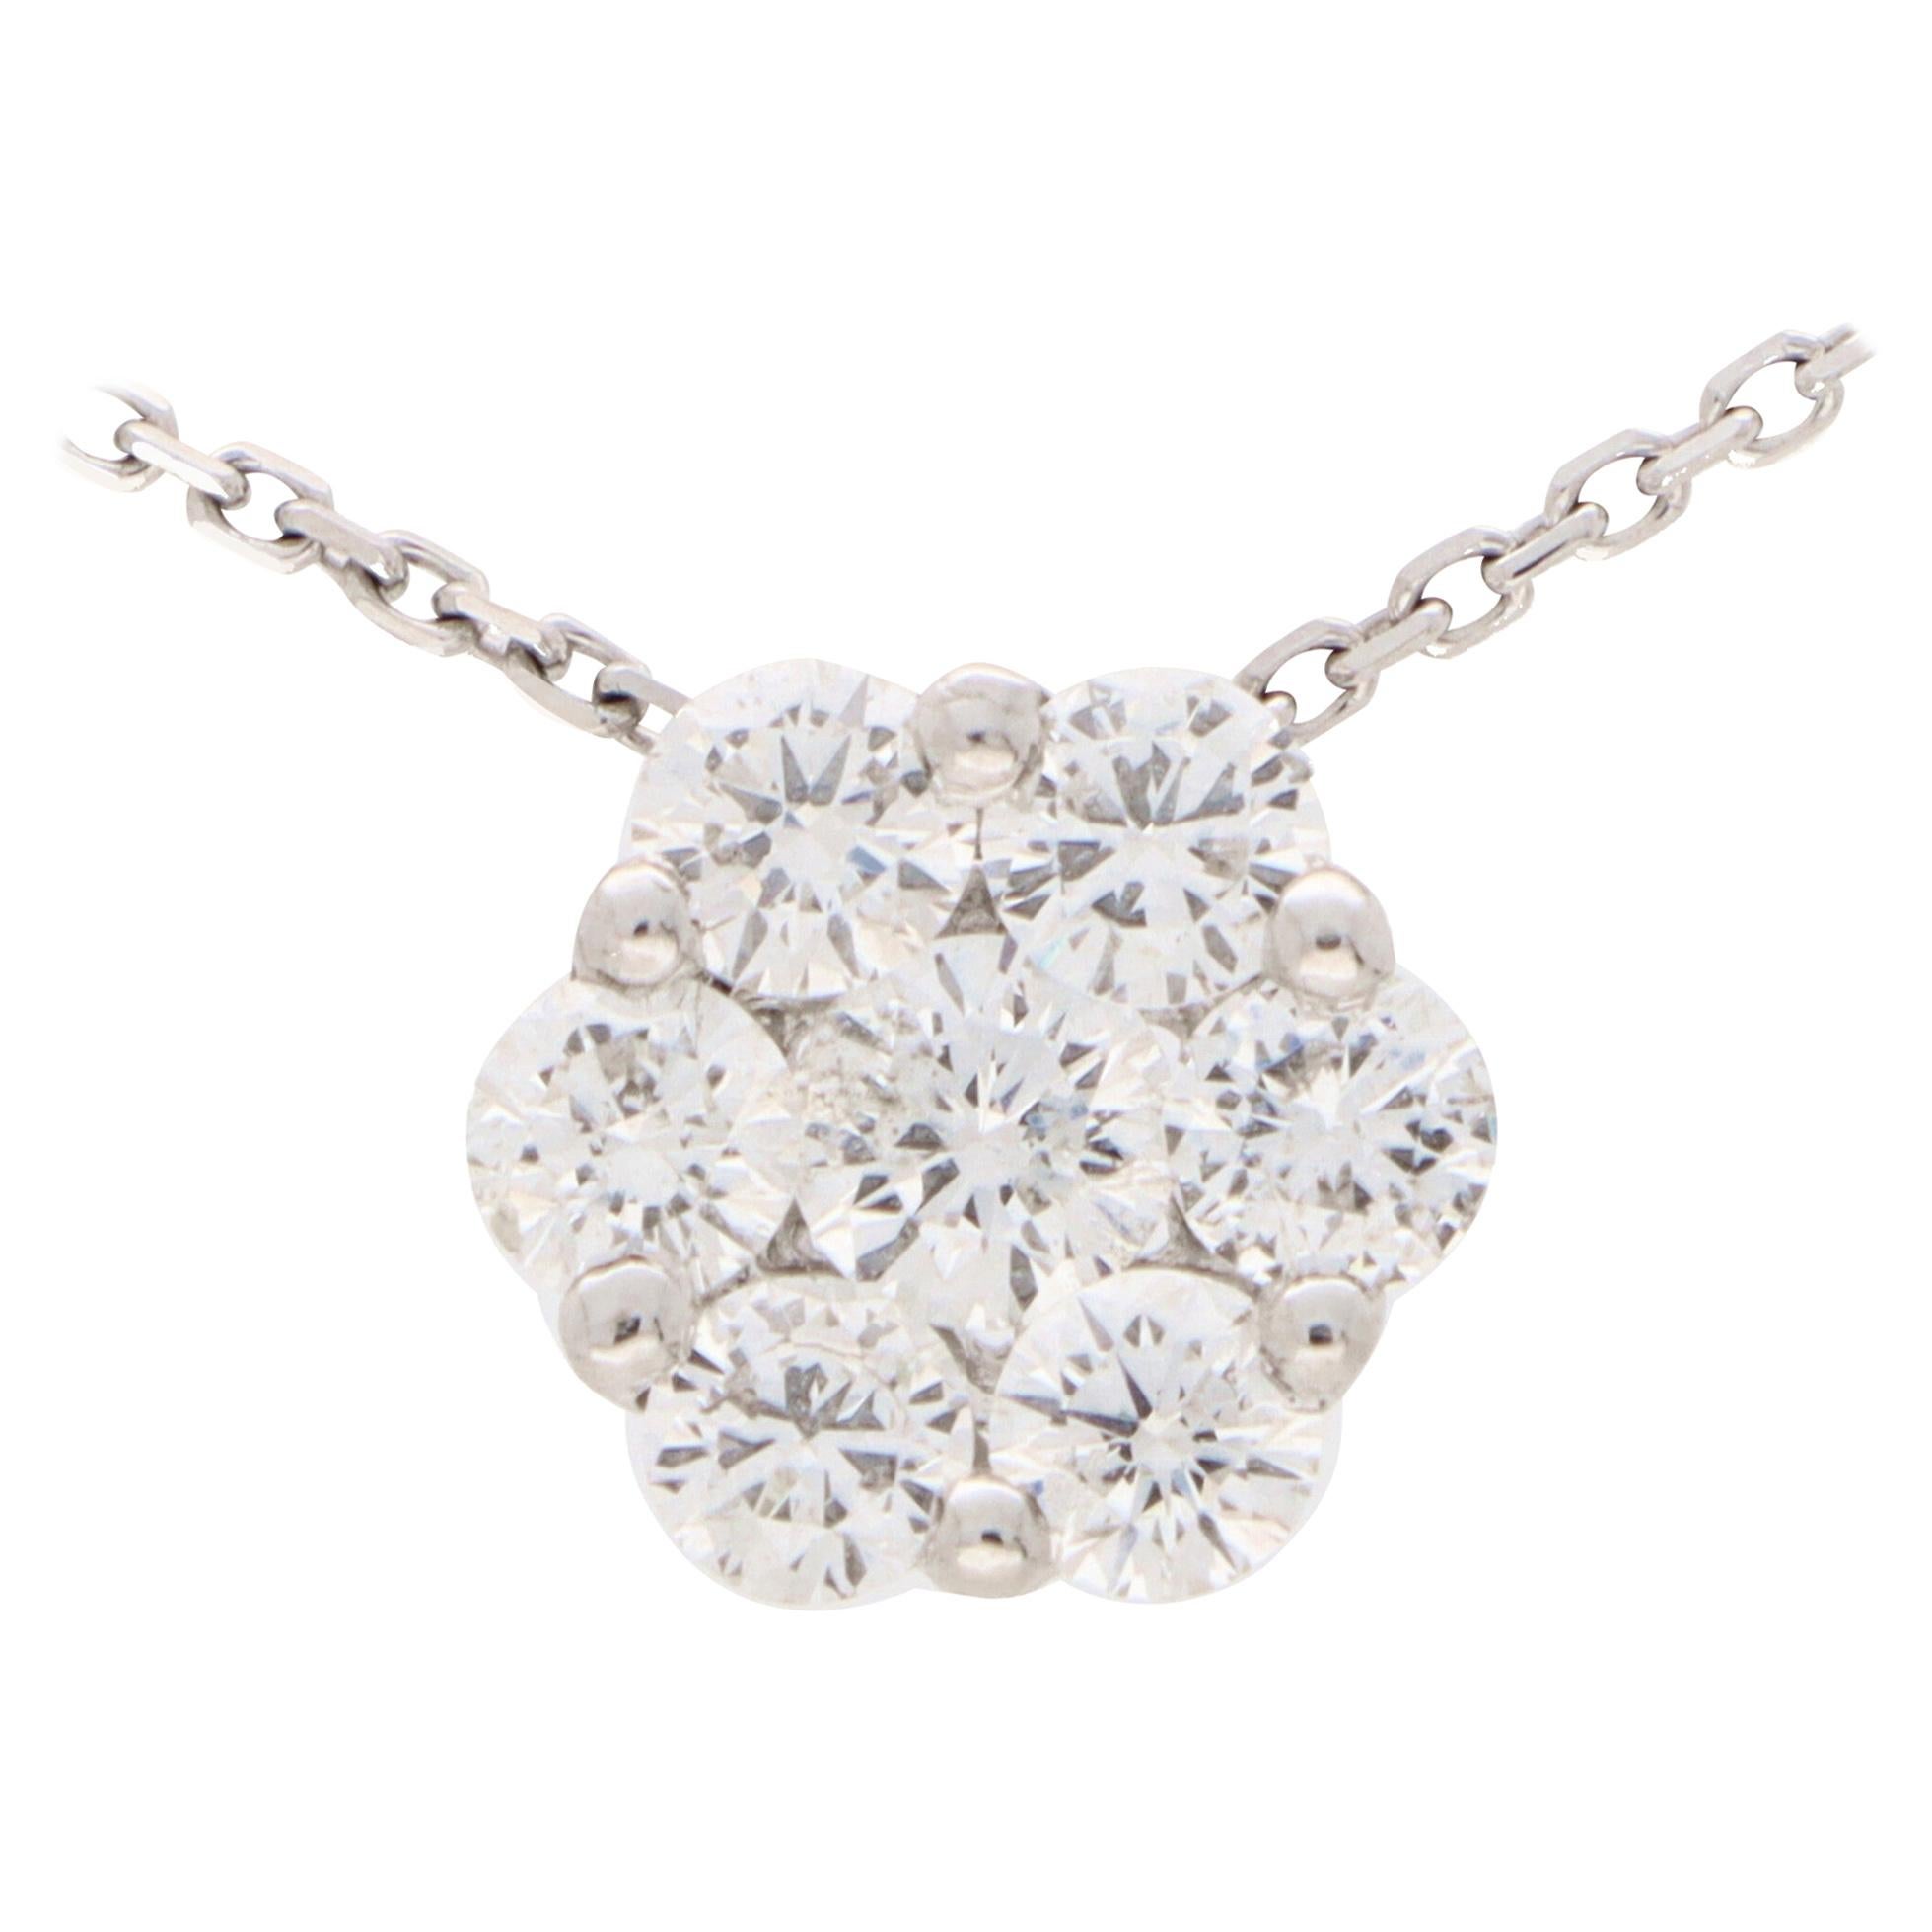 Contemporary Diamond Floral Cluster Necklace Set in 18k White Gold